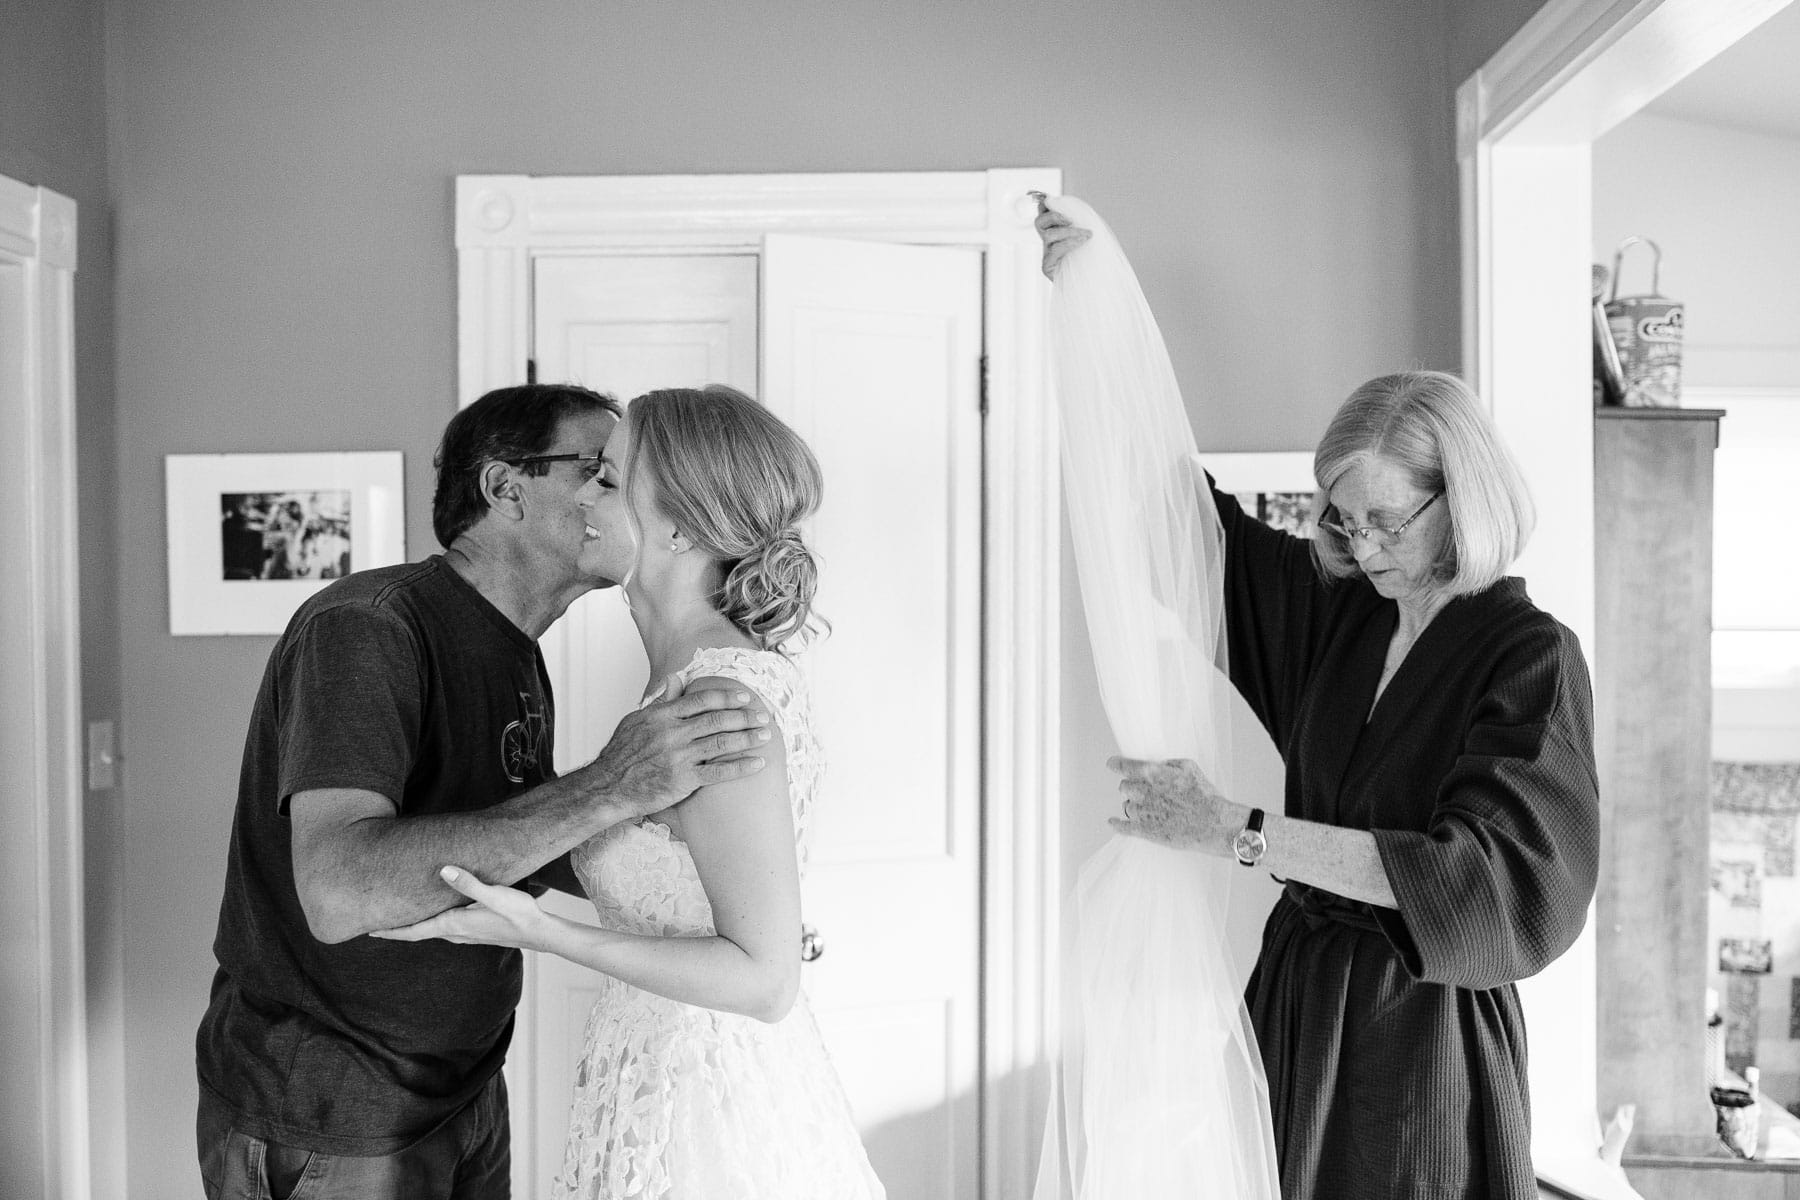 scenes from getting ready for a wedding in bride's childhood home | Kelly Benvenuto Photography